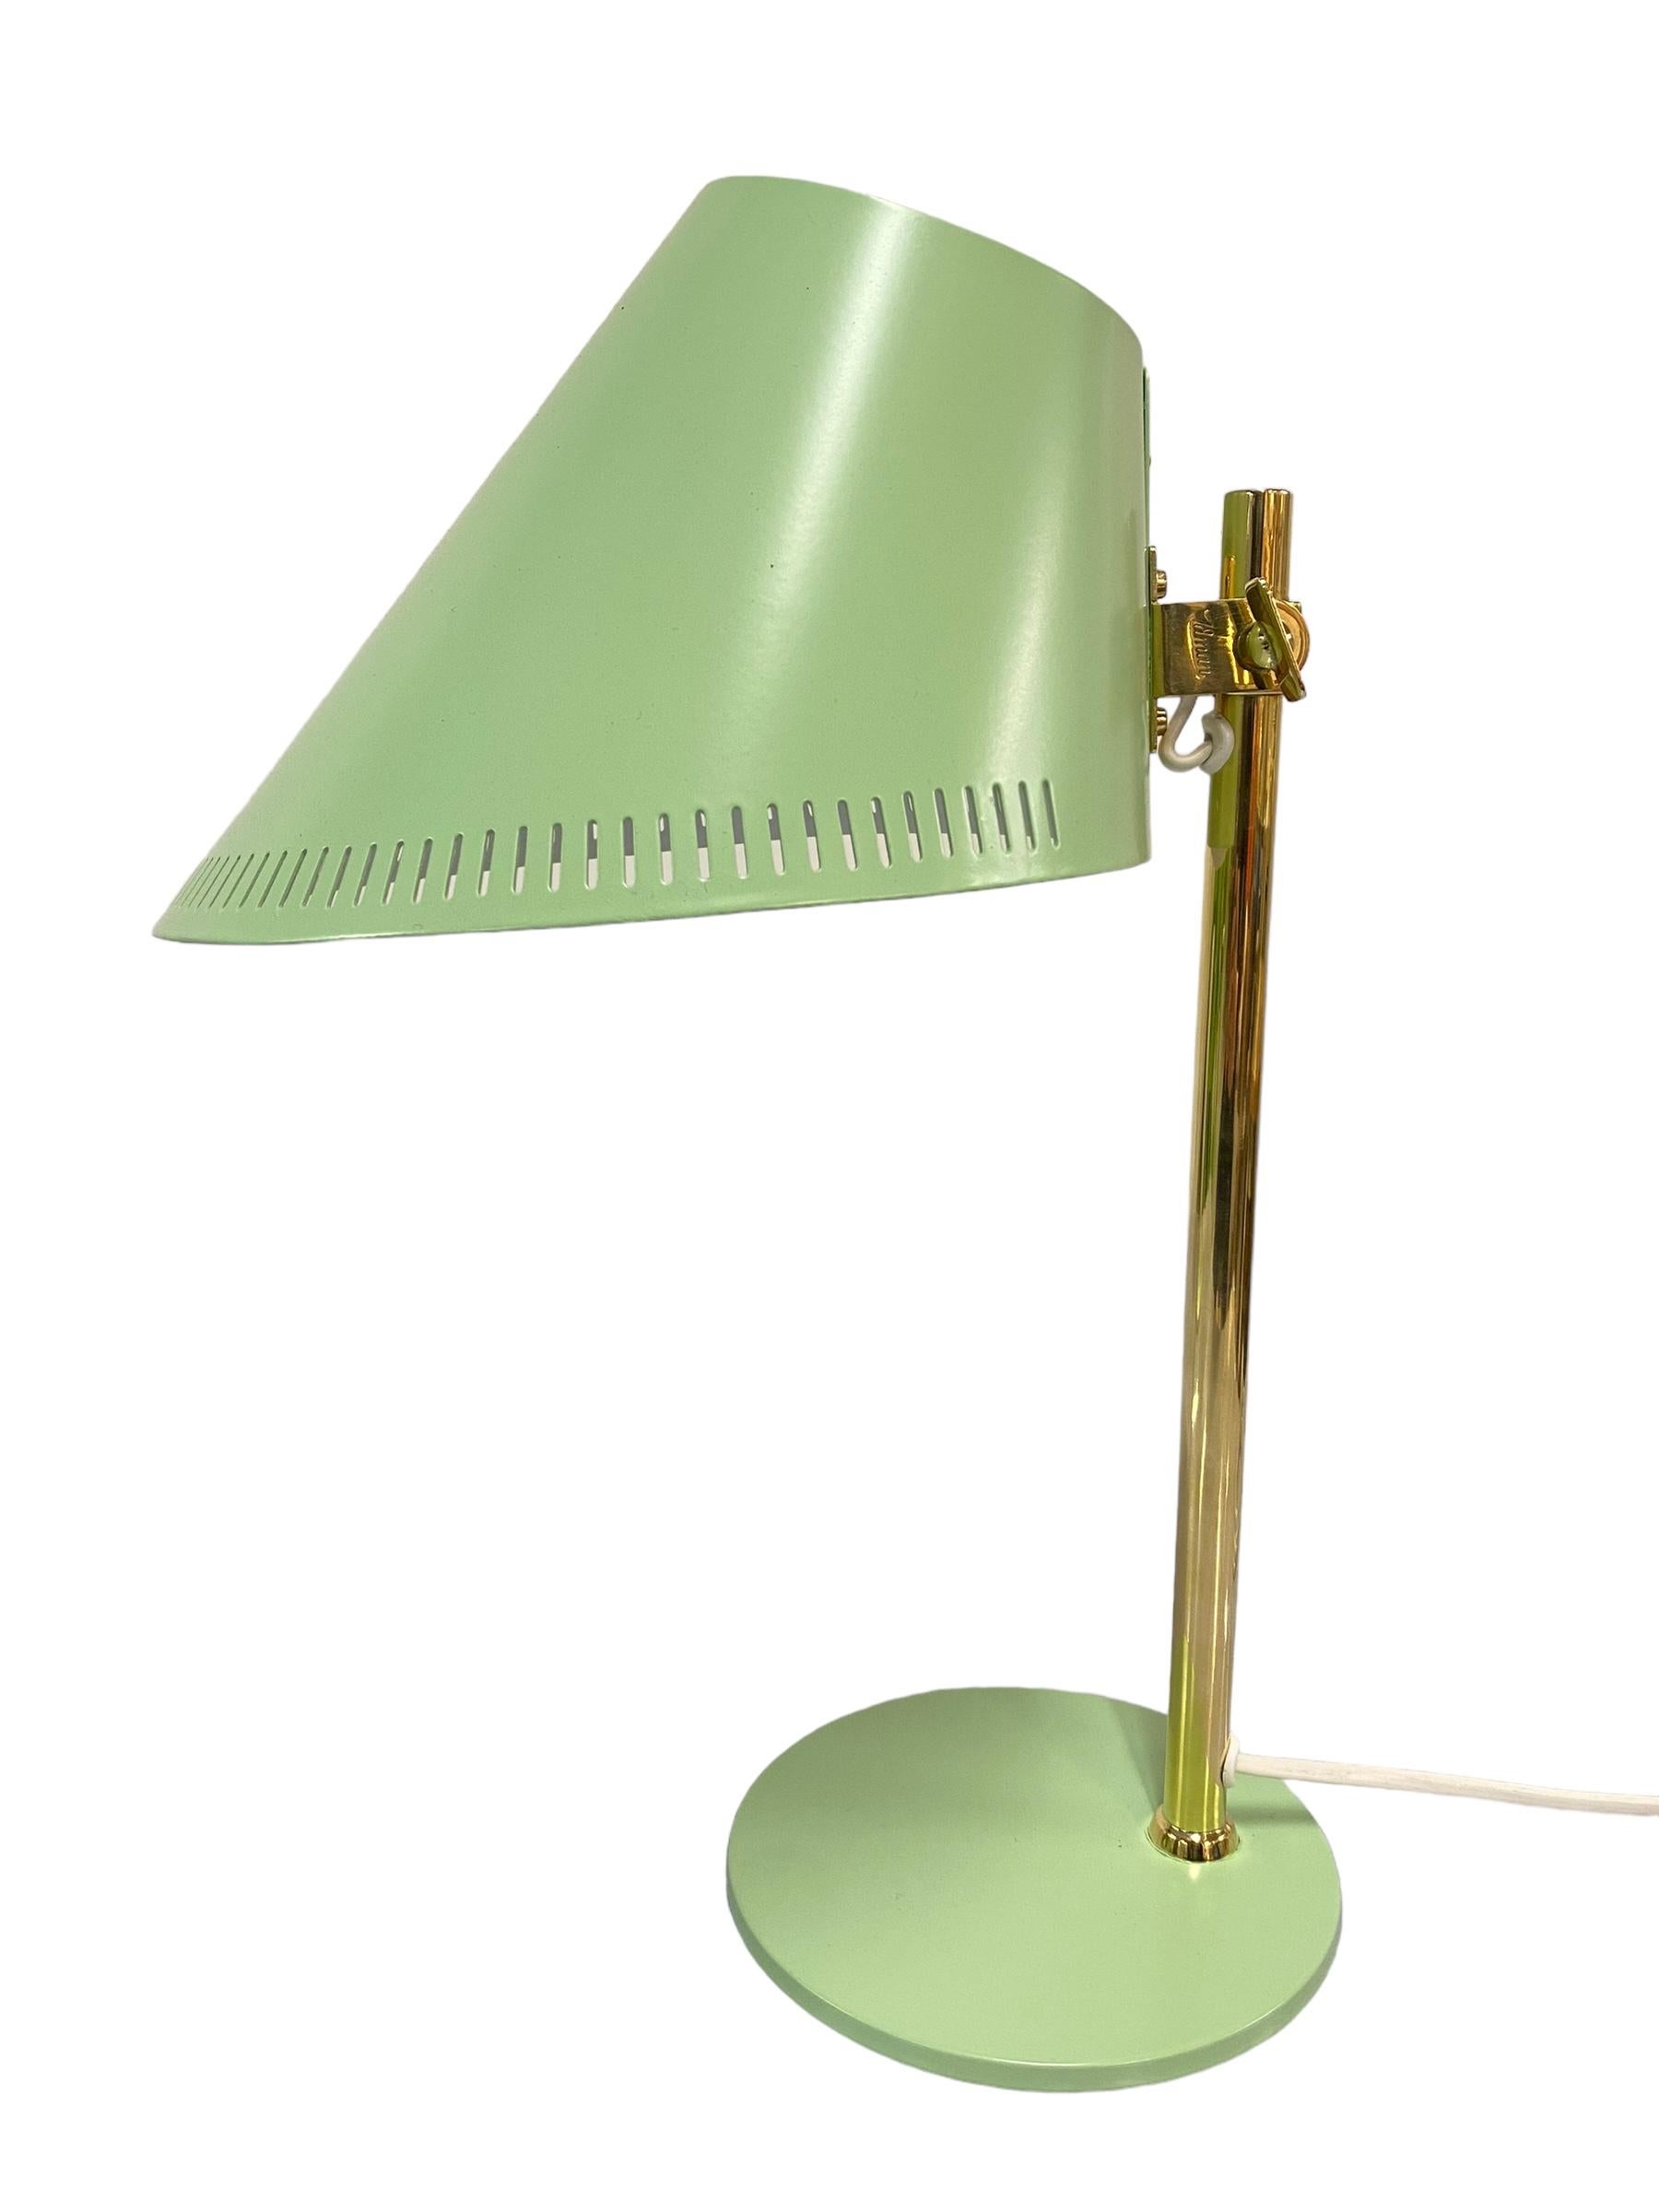 Finnish Pair of Paavo Tynell Table Lamps Model. 9227, Idman Oy 1950s For Sale